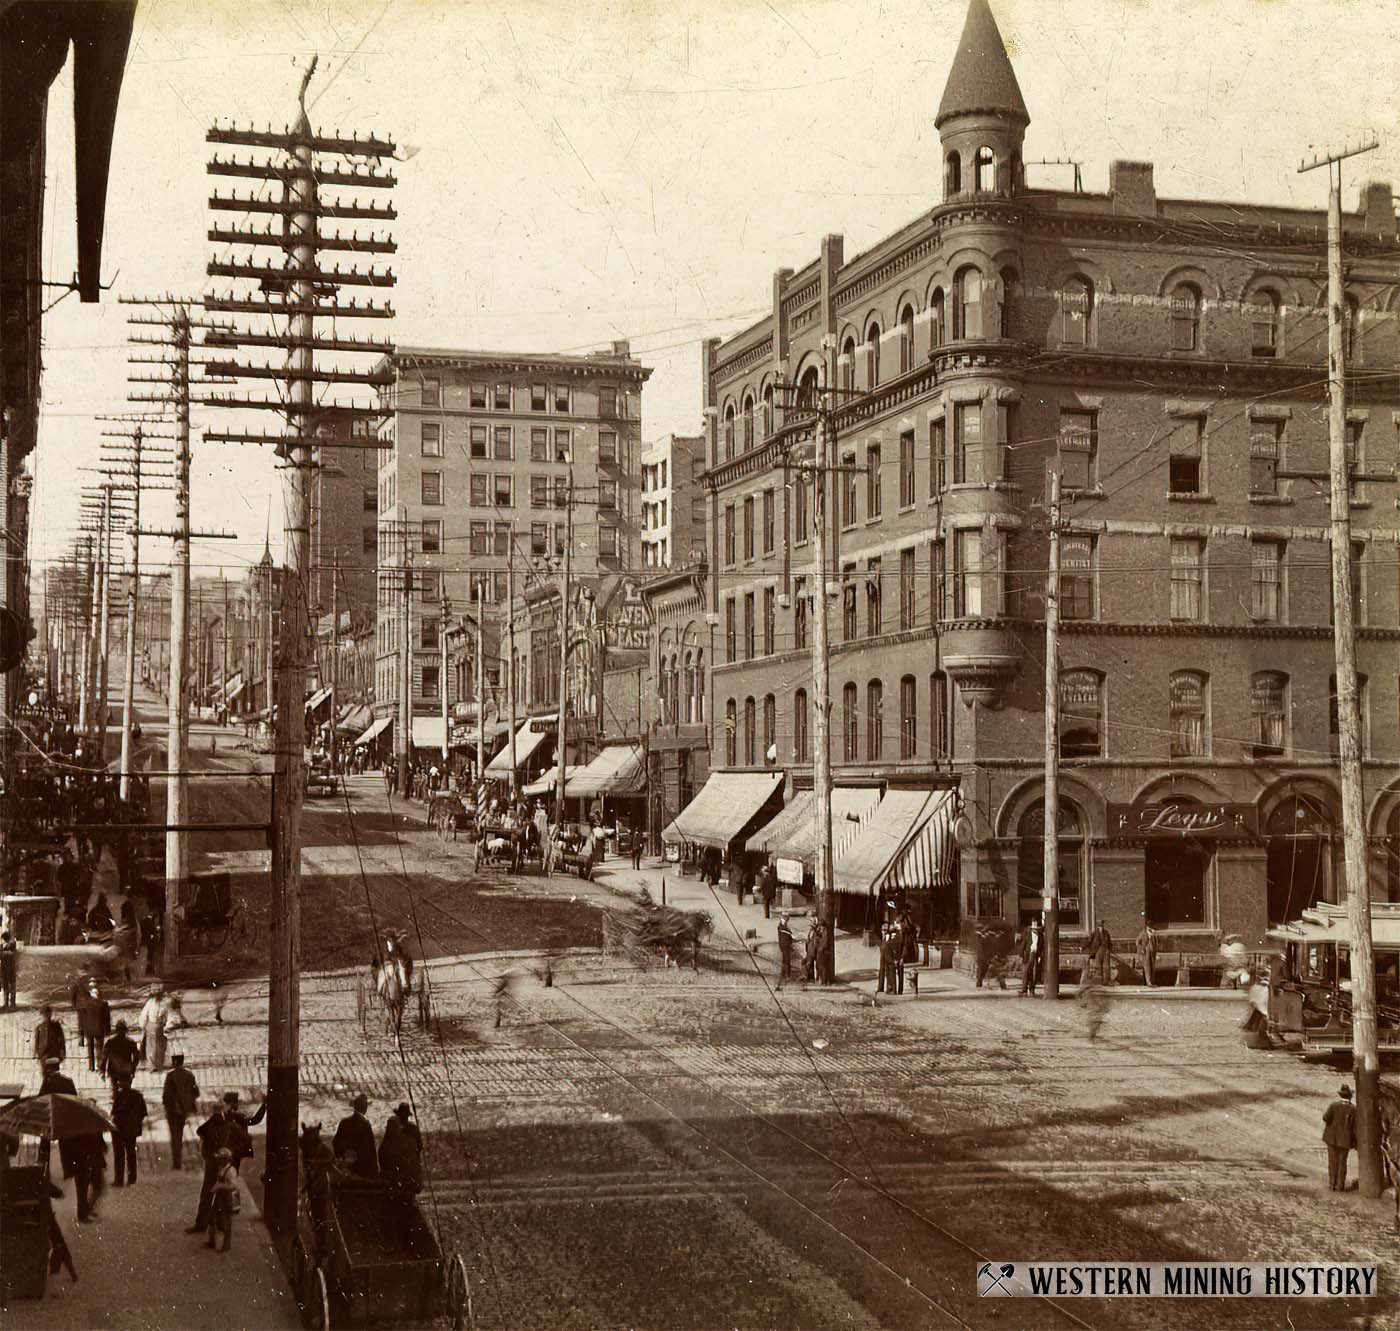 Intersection of Main and Park - Butte, Montana ca. 1905